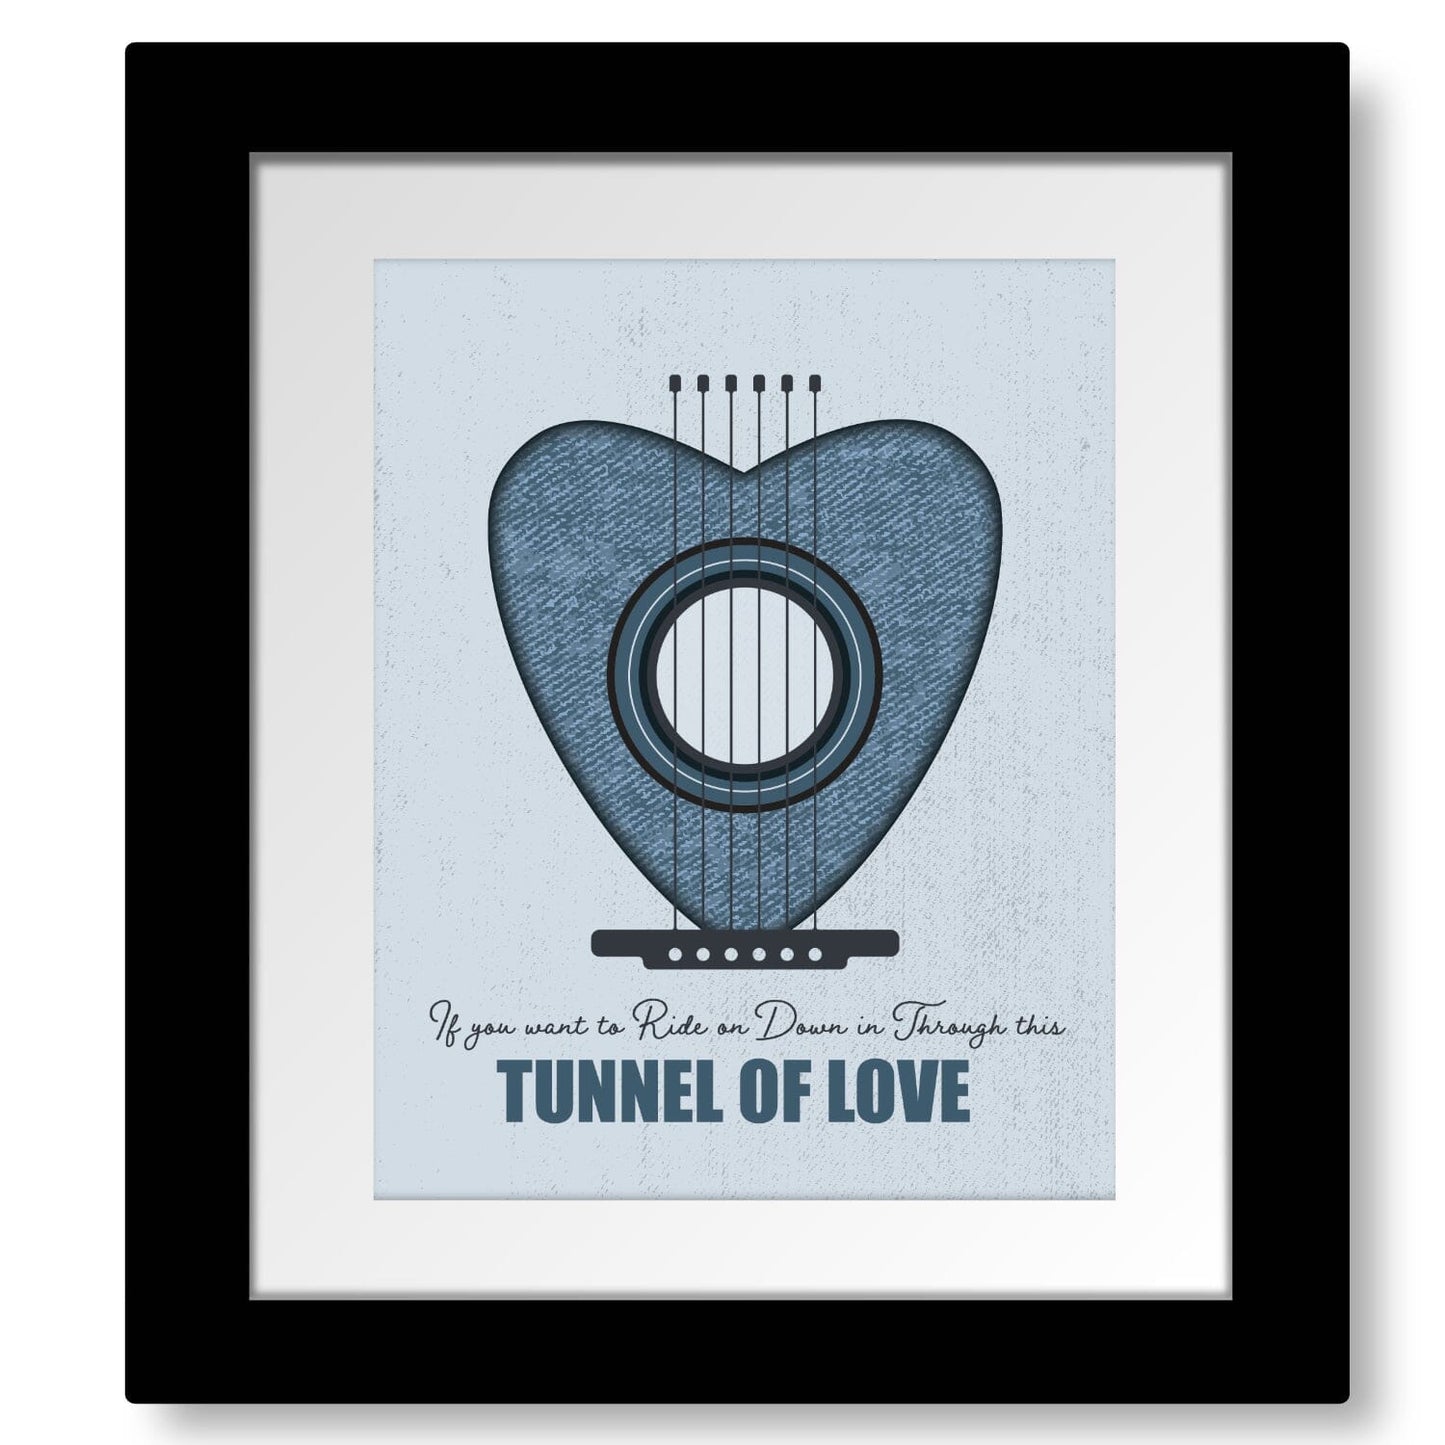 Tunnel of Love by Bruce Springsteen - Lyric Rock Music Art Song Lyrics Art Song Lyrics Art 8x10 White Matted Print 